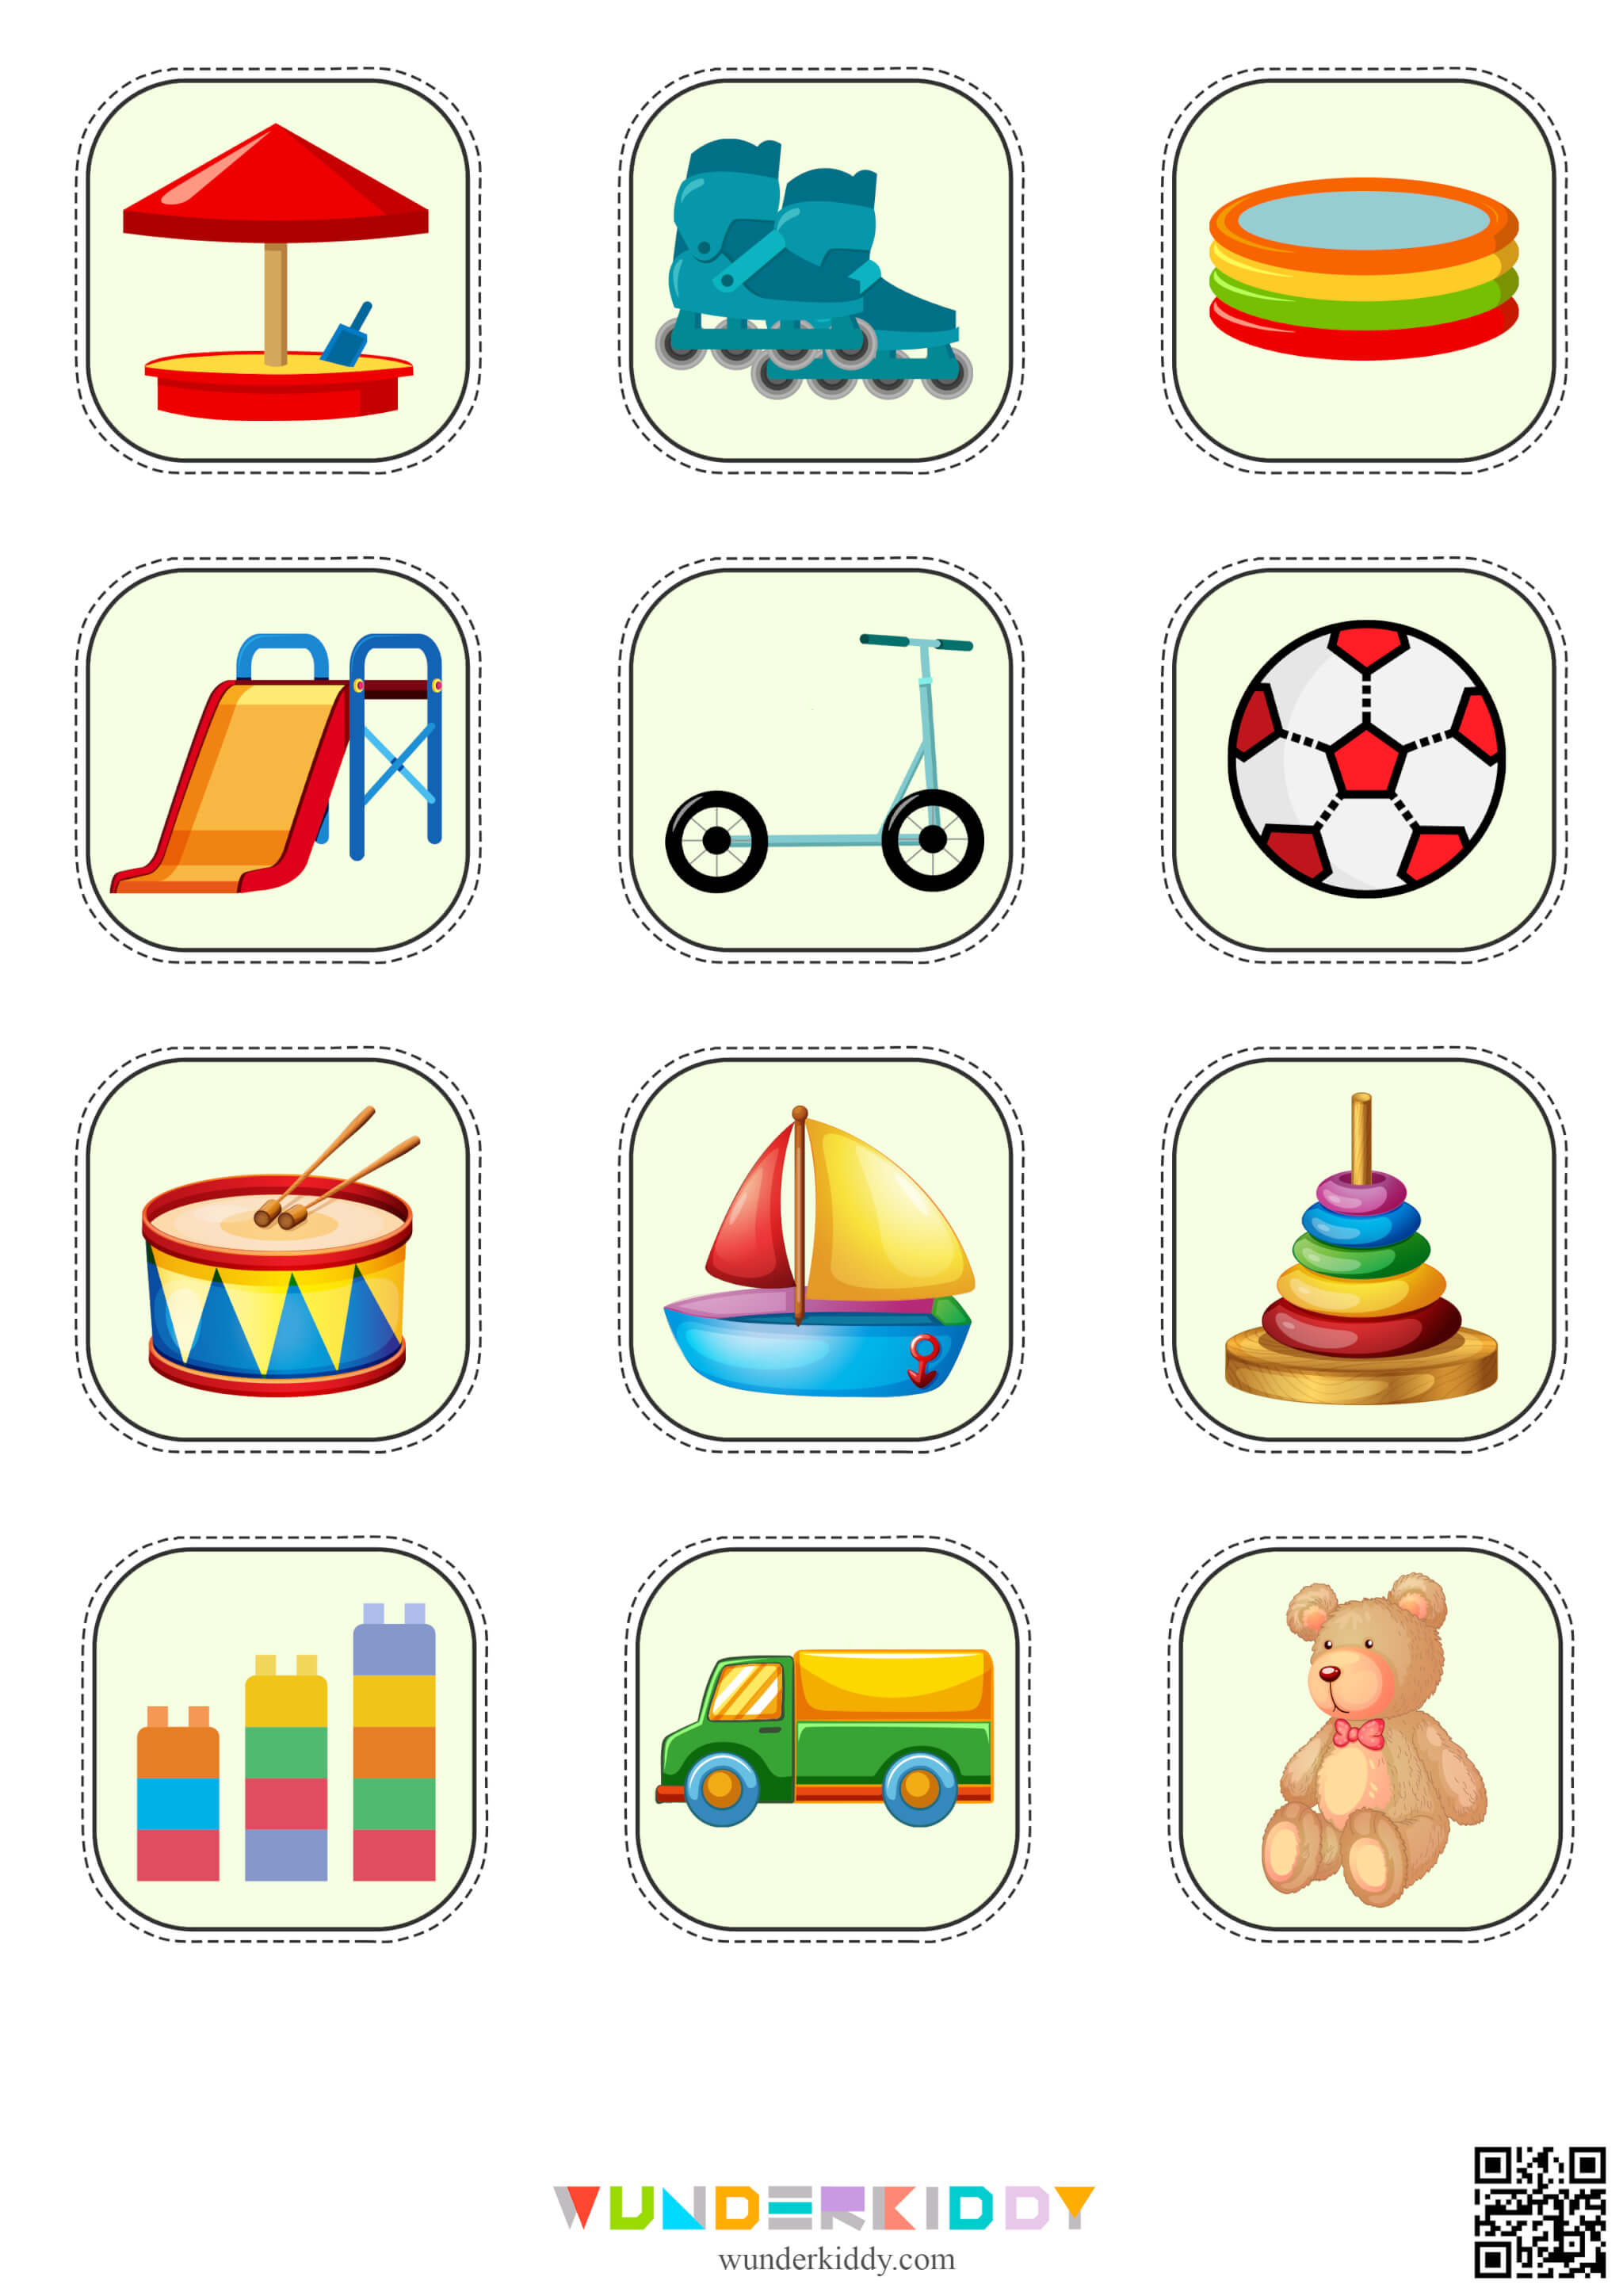 Toys Classification Sorting Game - Image 4